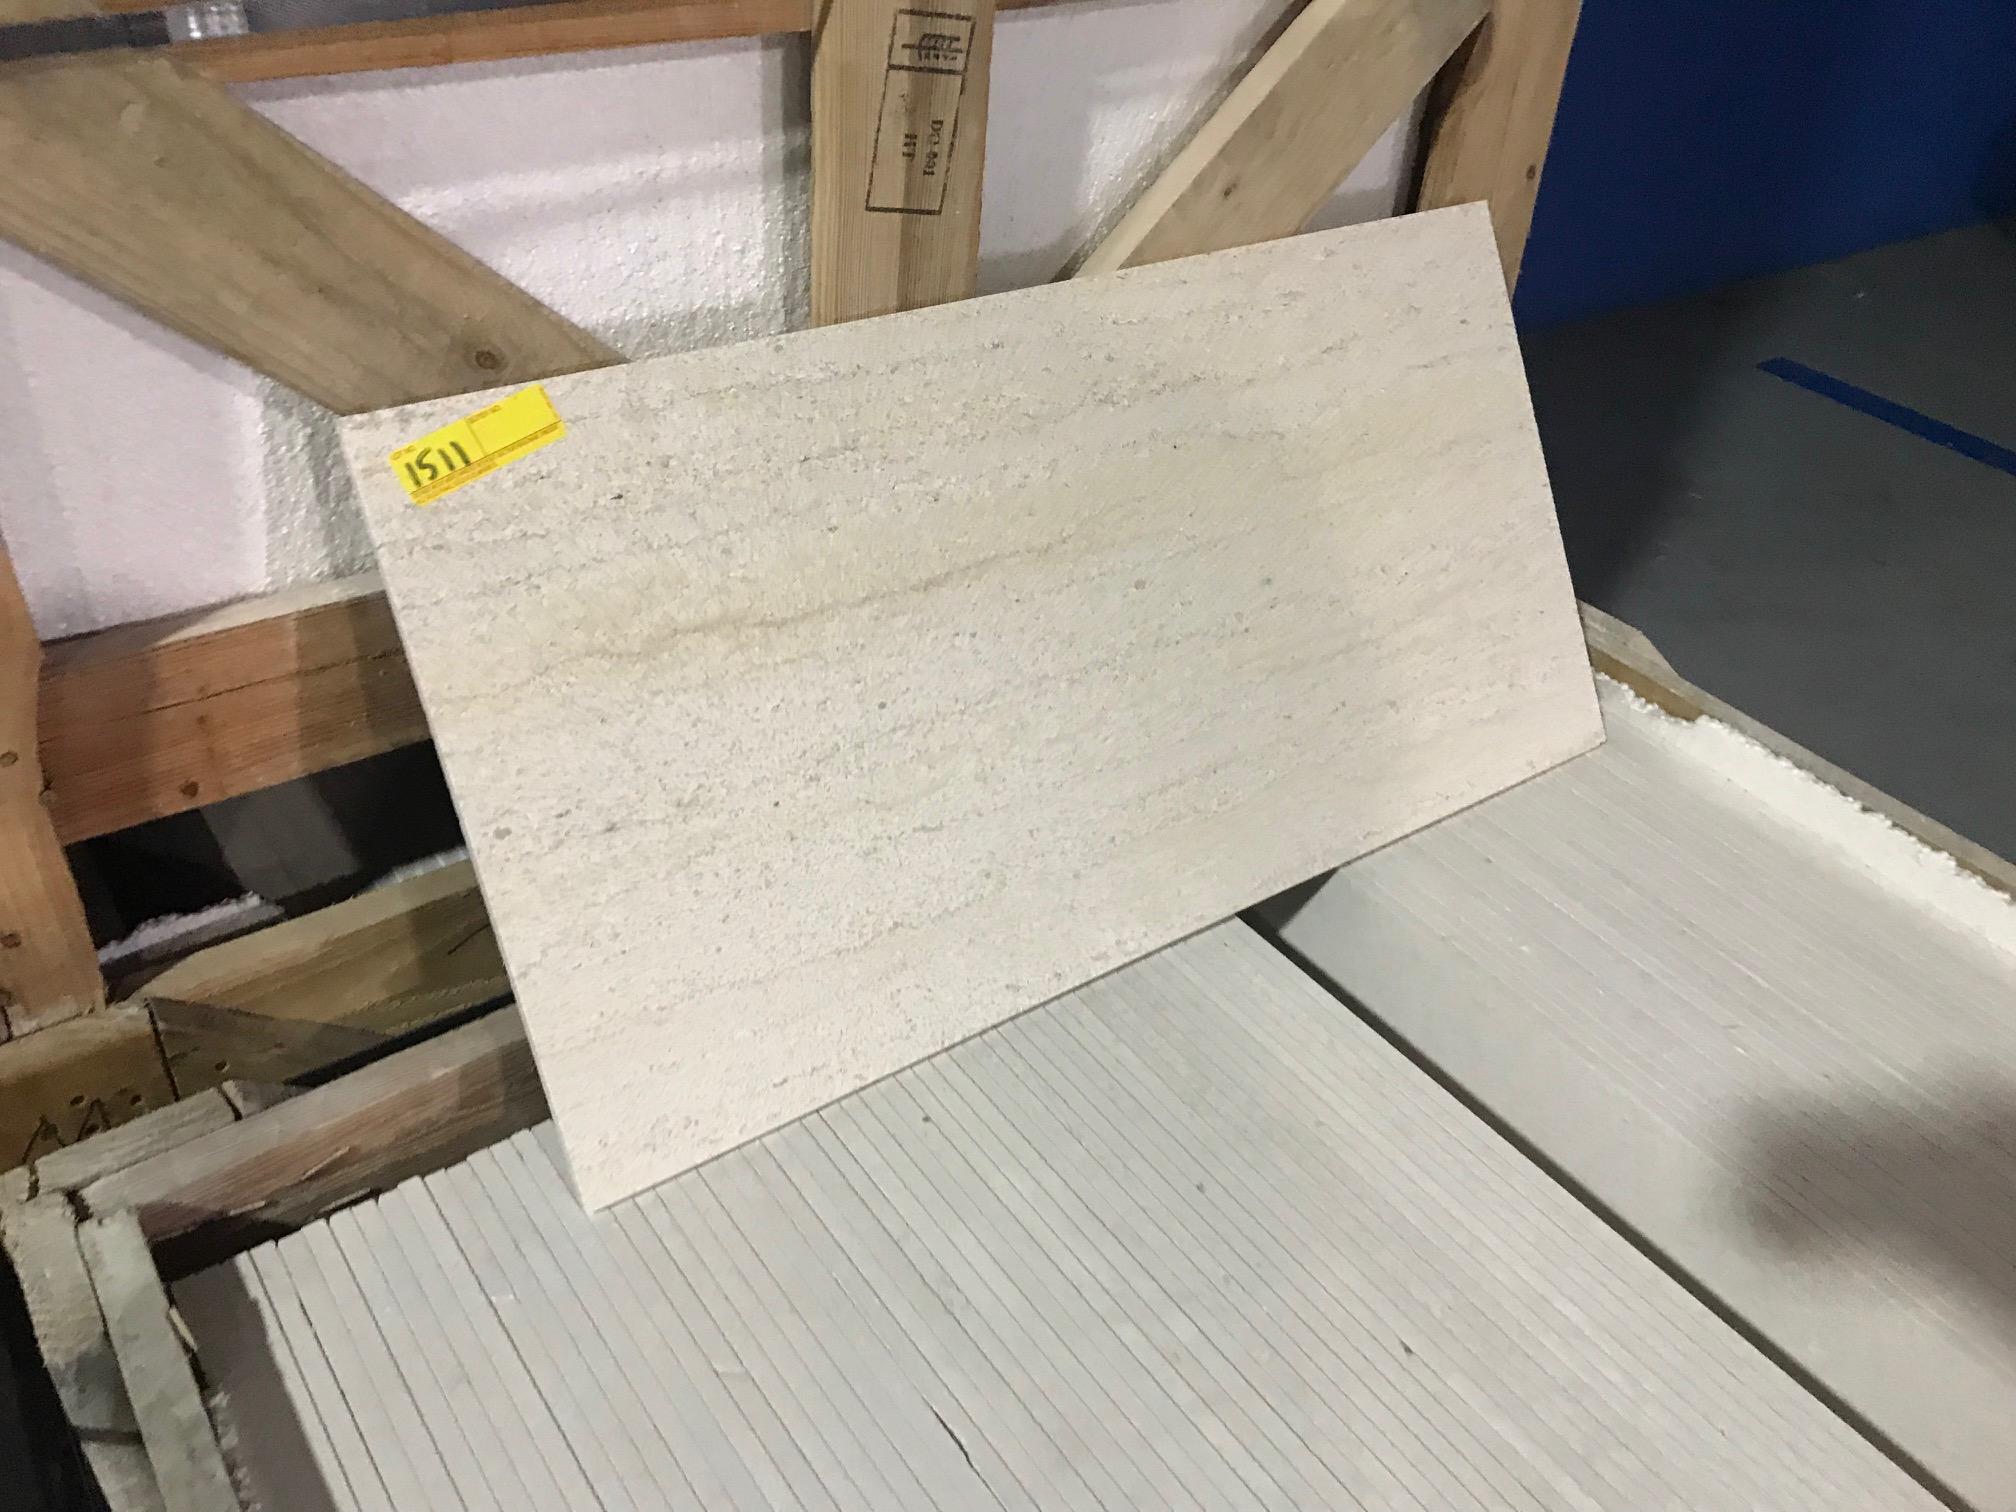 SQ.FT. - HONED VEIN CUT MARBLE - 12'' x 36'' x 7/16'' - 80 PIECES / 240 SQ.FT. (CRATE #112)